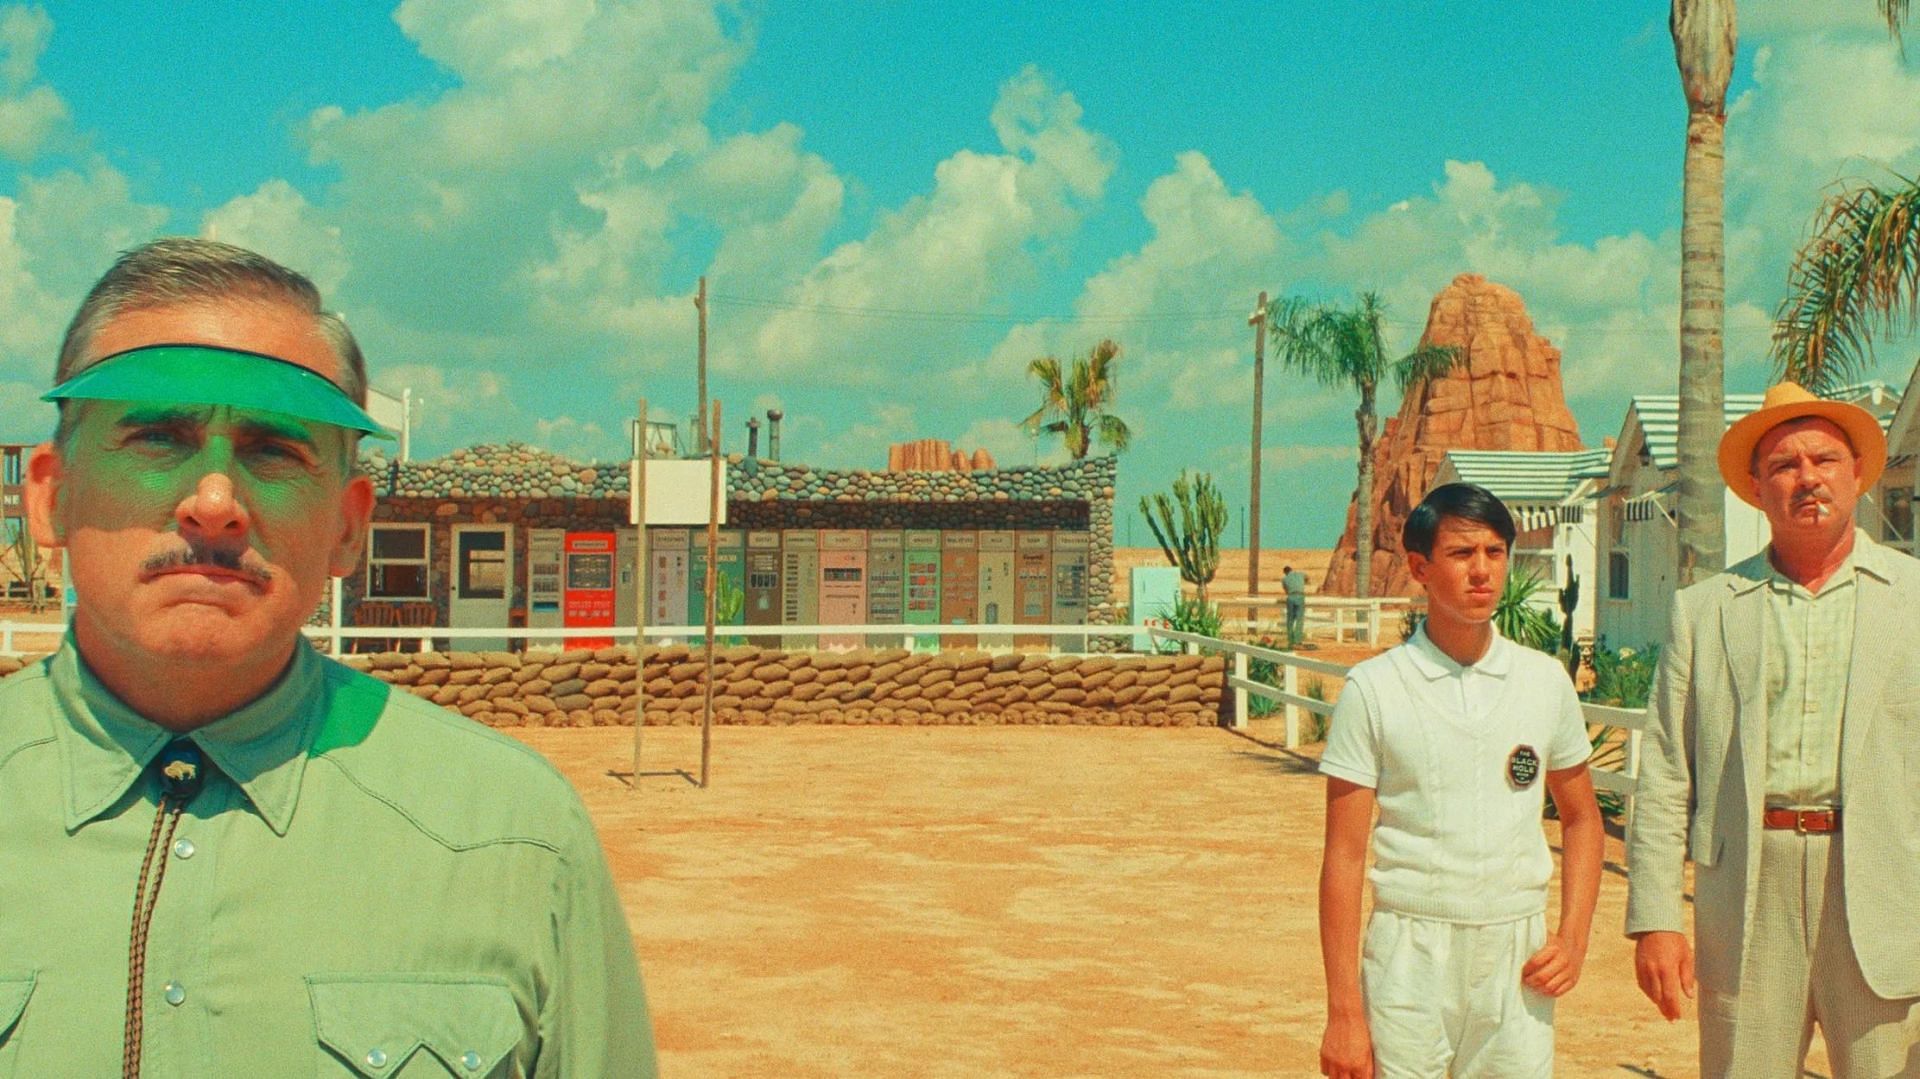 Asteroid City exposes the symmetry and colour of Wes Anderson (Image via Wes Anderson)